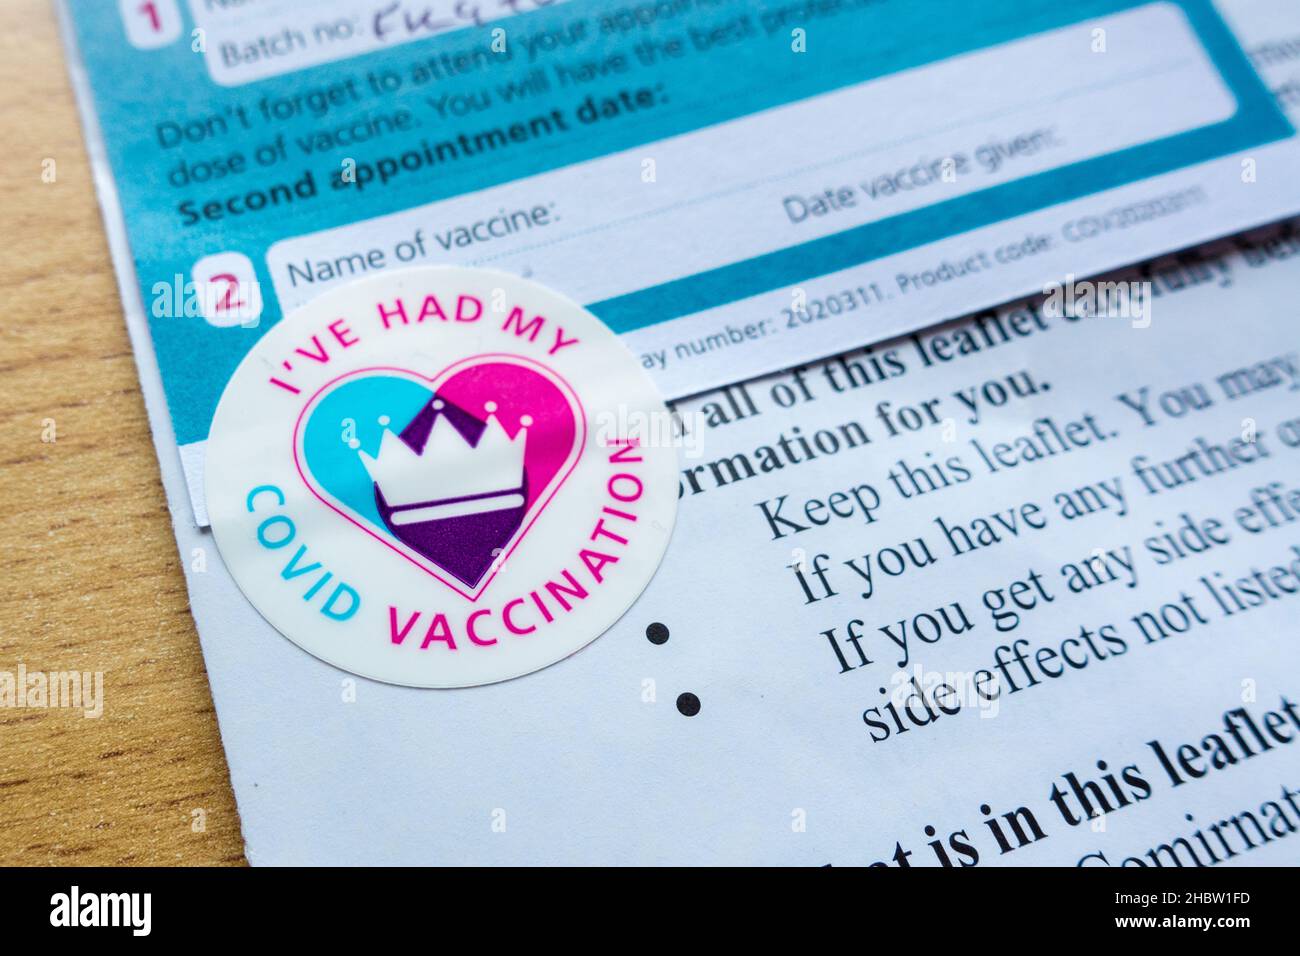 Covid Booster Jab vaccination card and leaflet with sticker Stock Photo